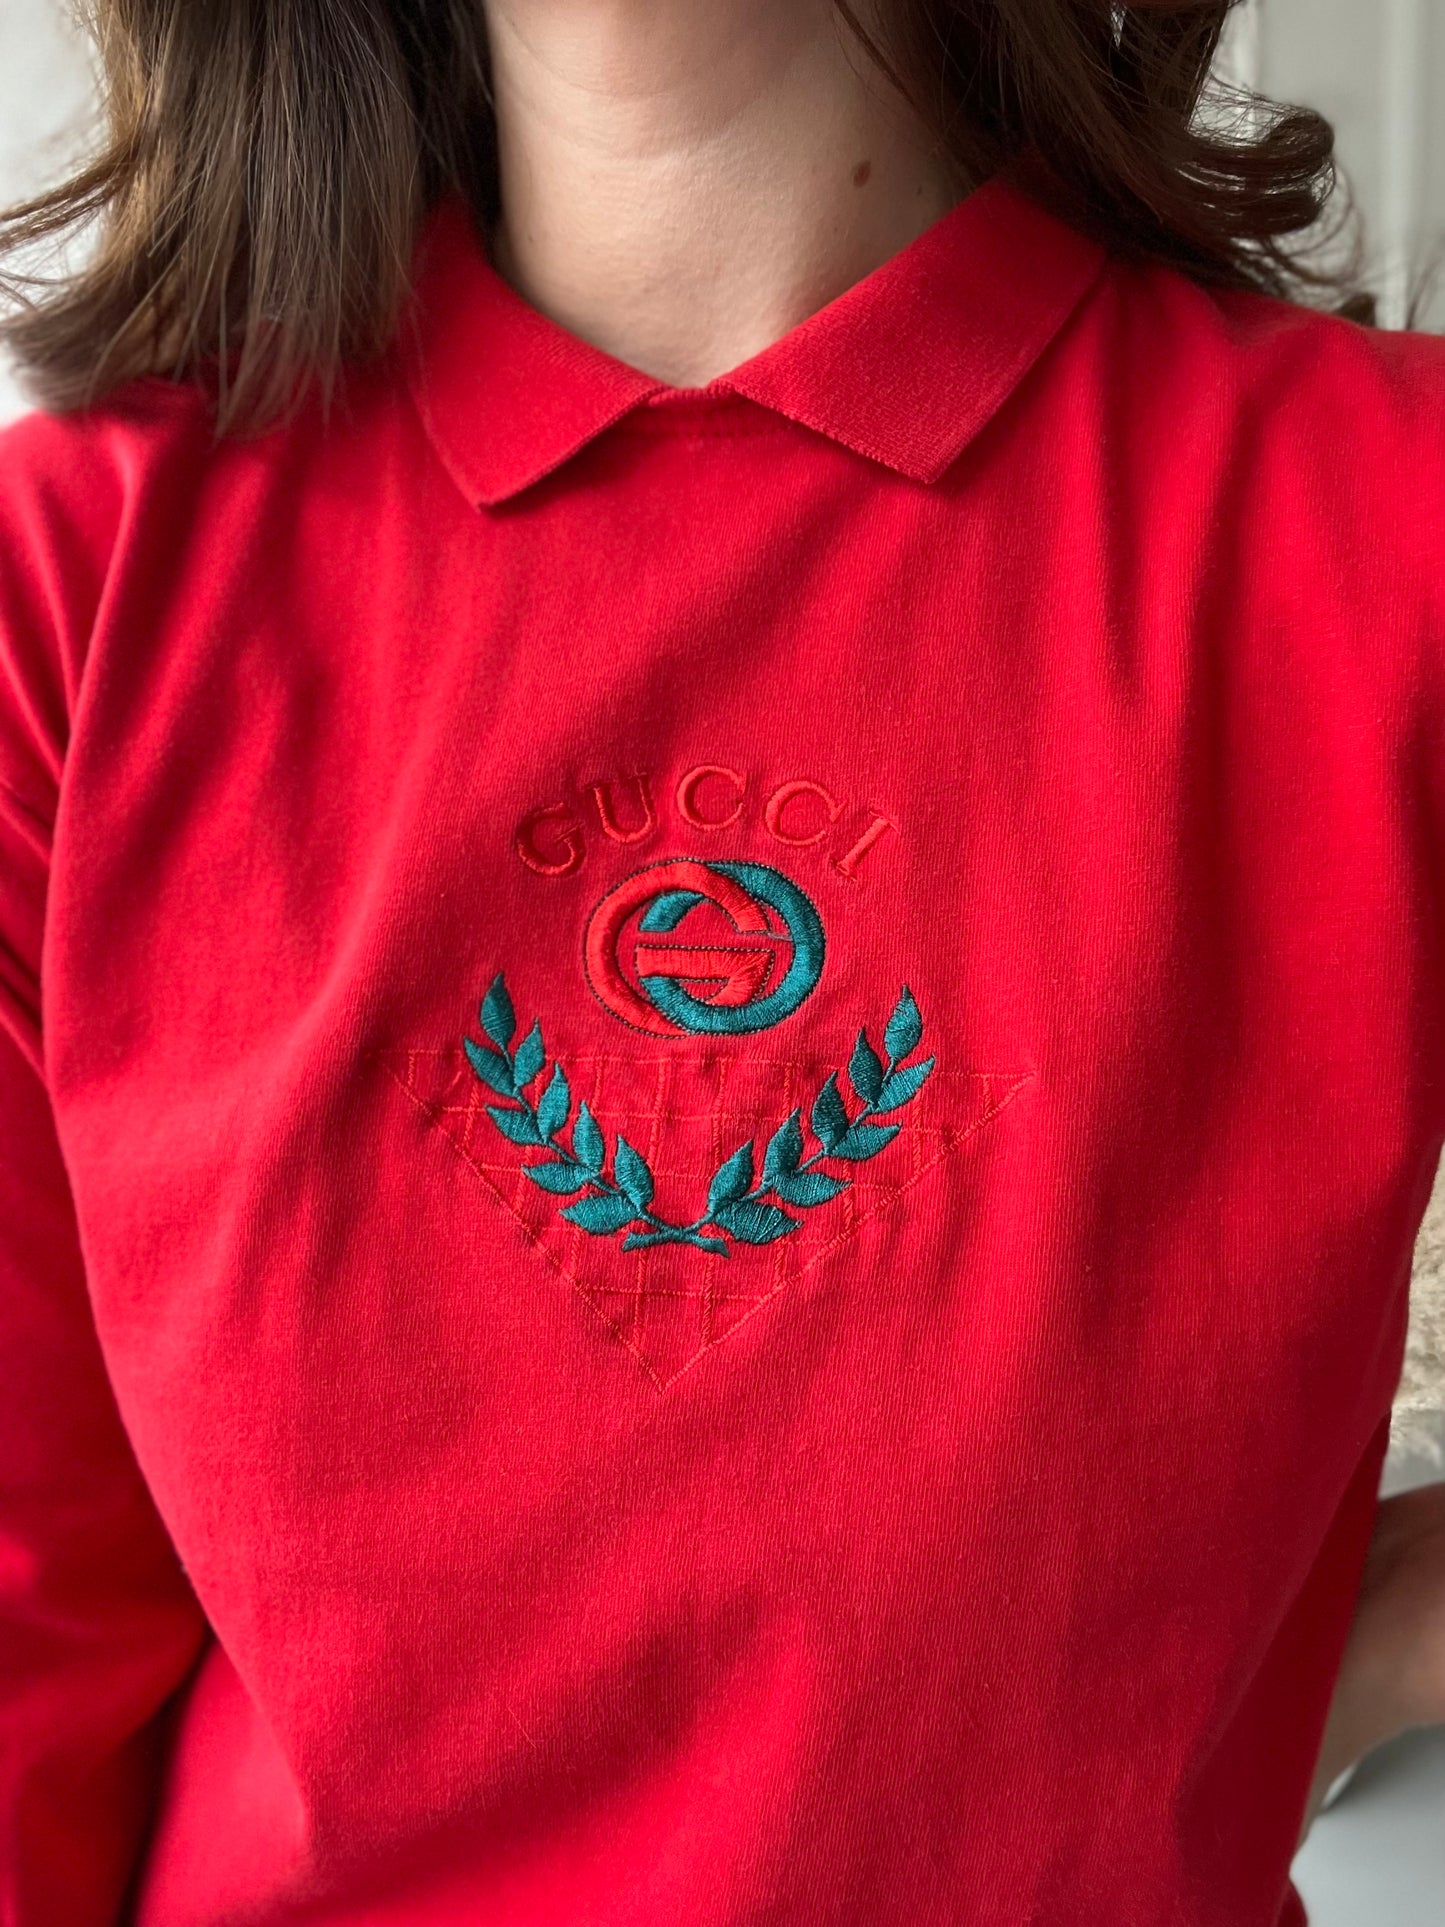 Vintage GUCCI Crested Unisex Polo Shirt - Size S-L